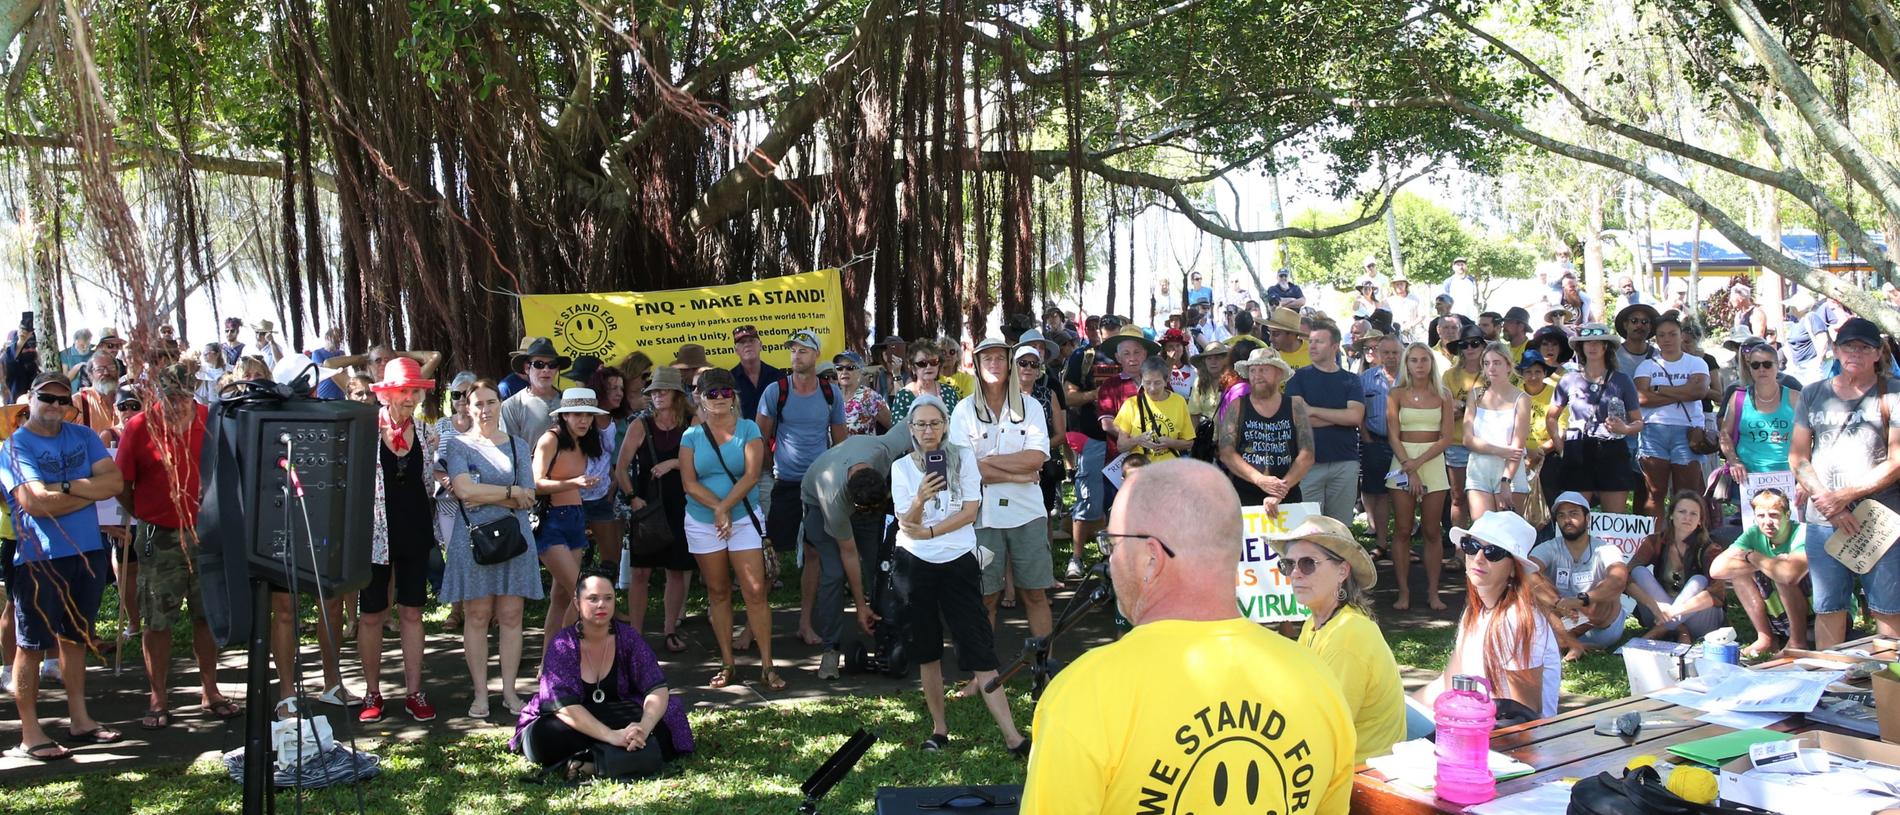 The Cairns We Stand For Freedom protest held on the Cairns Esplanade today. Picture: Peter Carruthers